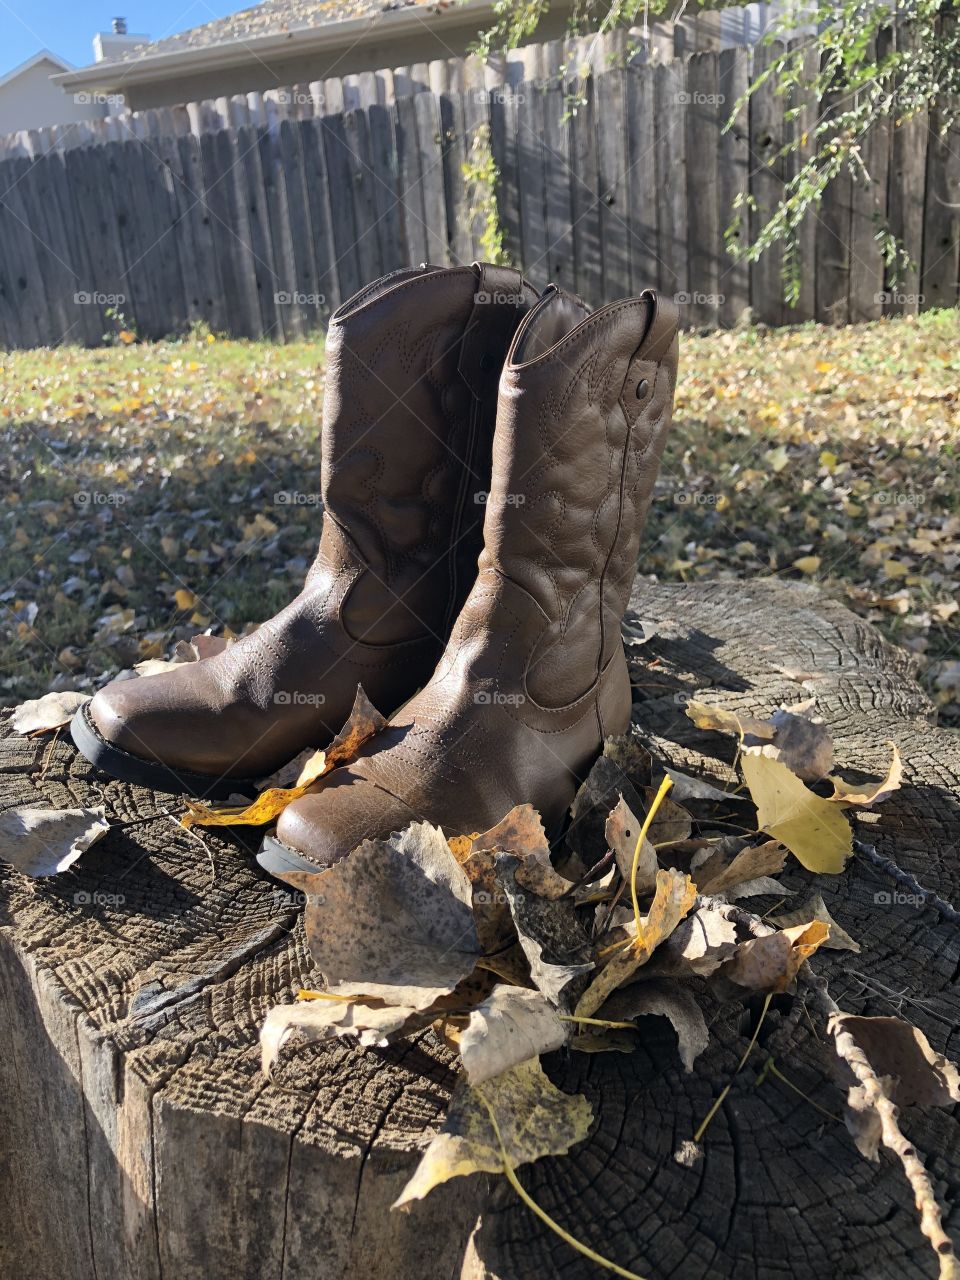 Cowboy boots of a child and leaves